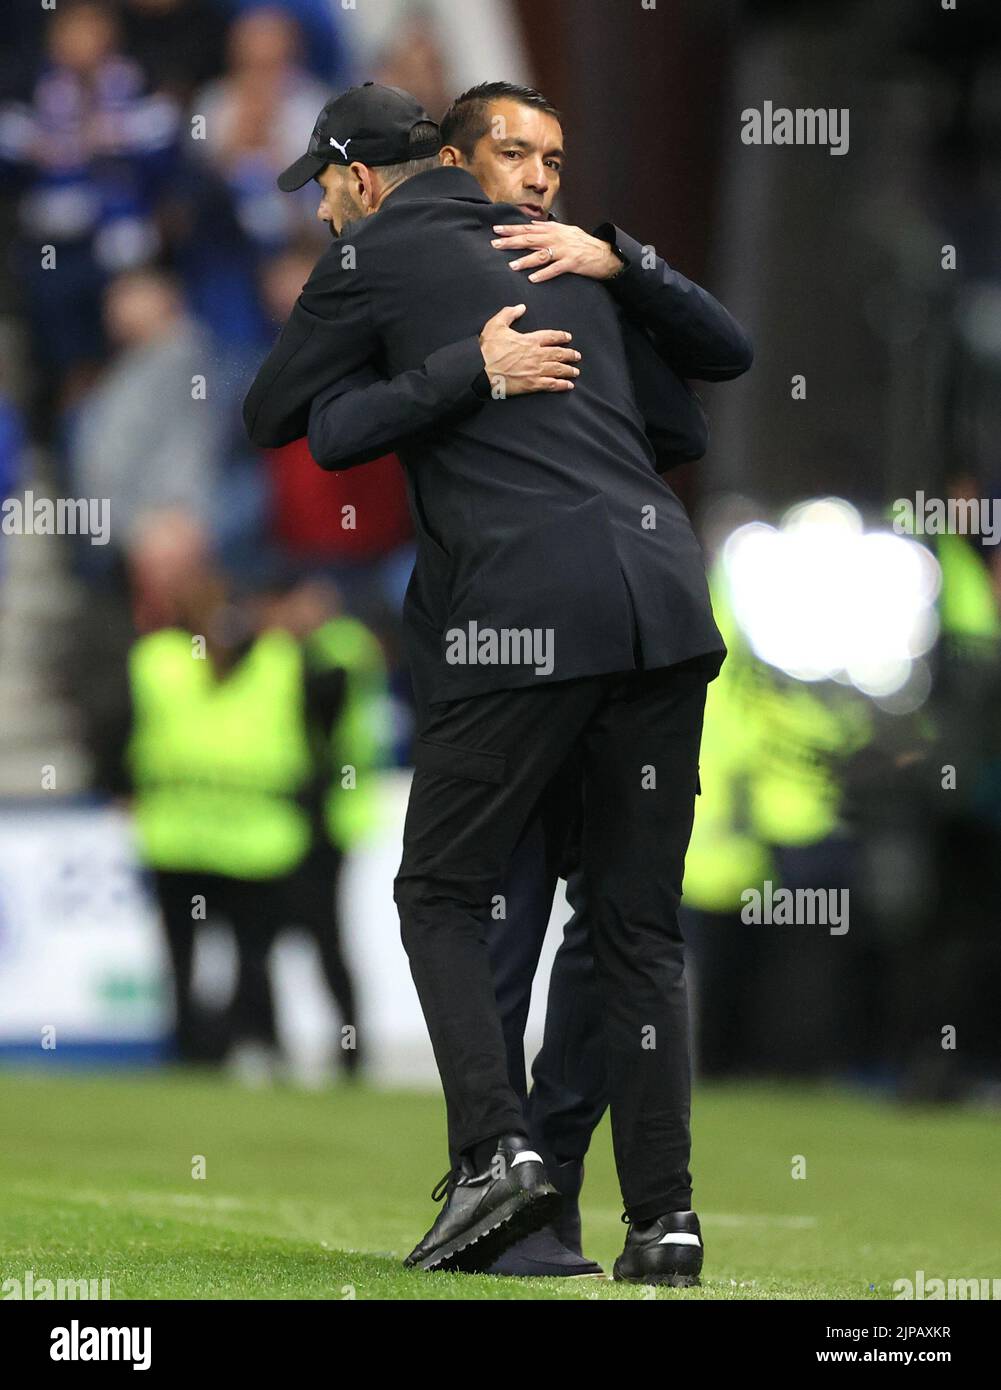 Rangers manager Giovanni van Bronckhorst greets PSV Eindhoven manager Ruud van Nistelrooy following the Champions League qualifying match at Ibrox, Glasgow. Picture date: Tuesday August 16, 2022. Stock Photo